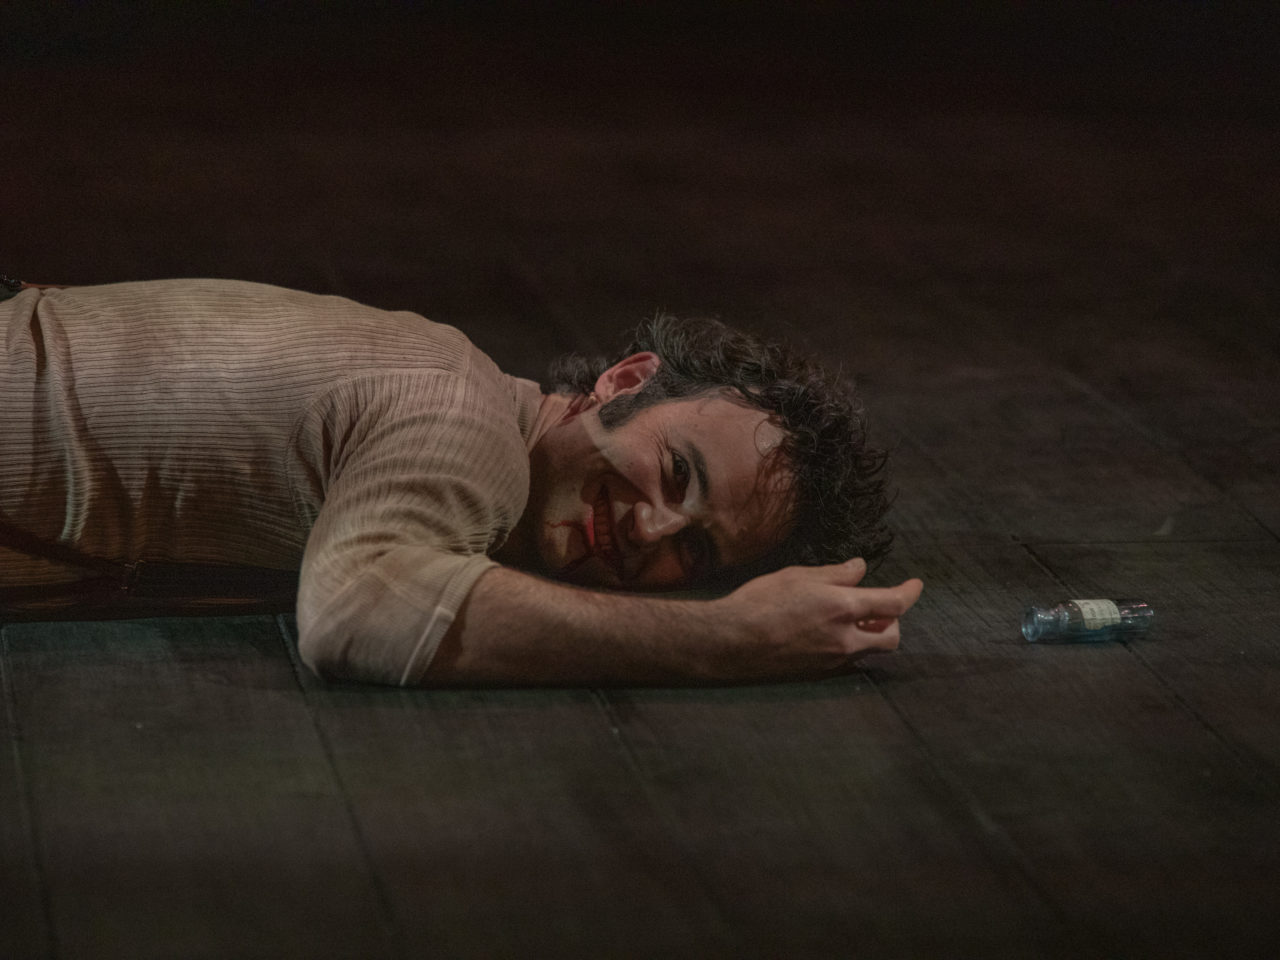 Nicholas Shaw (Jekyll and Hyde) is lay on the stage floor, he is smiling menacingly.